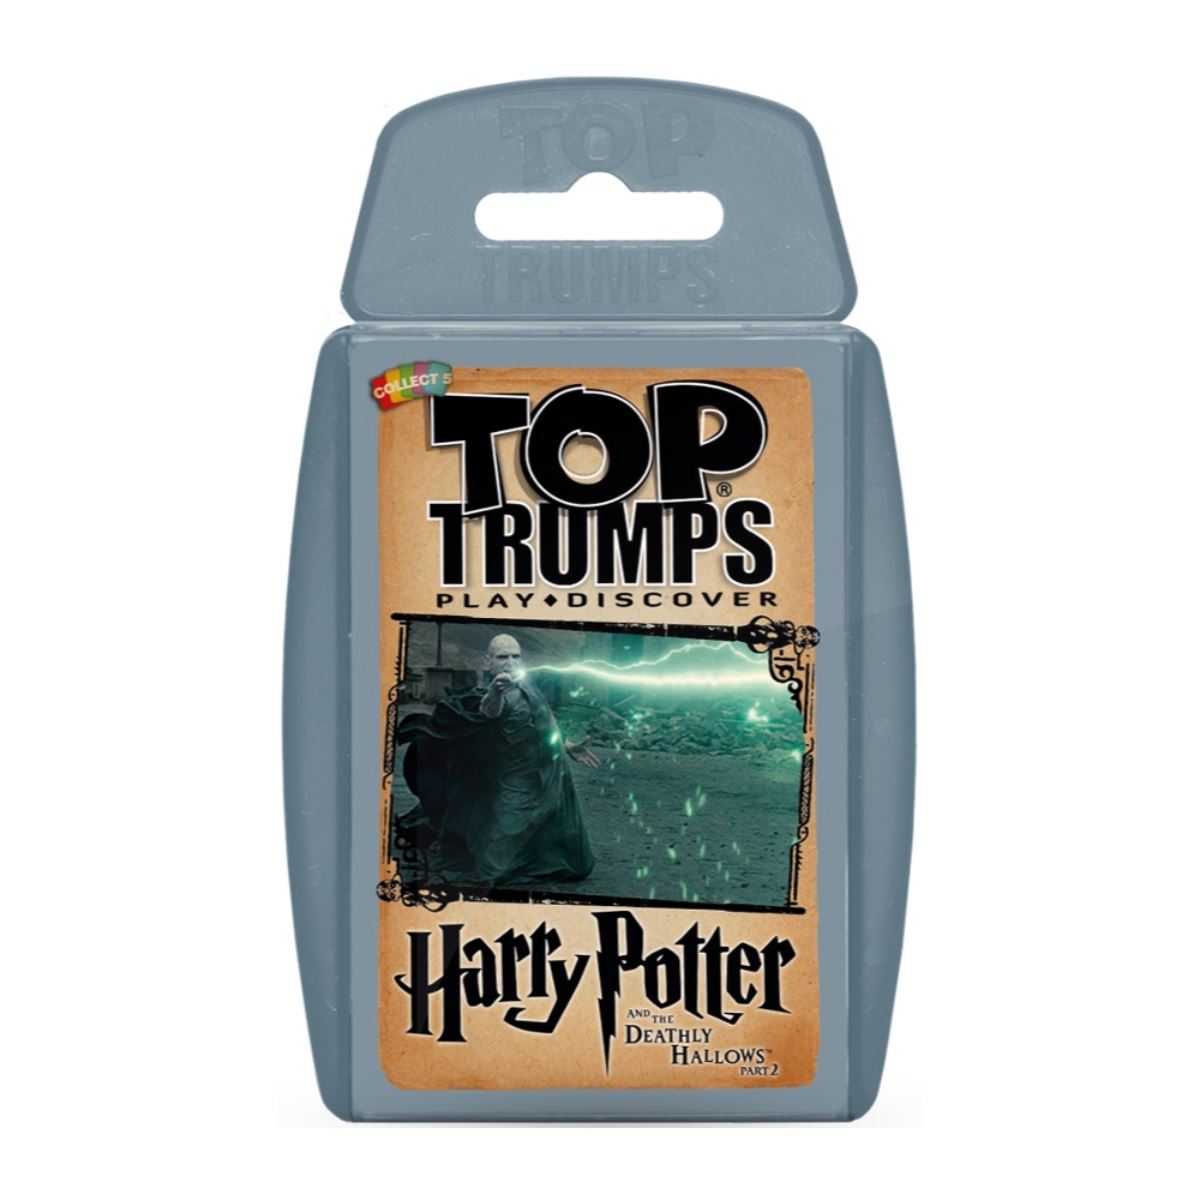 Harry Potter & The Deathly Hallows Pt 2 Top Trumps Card Game